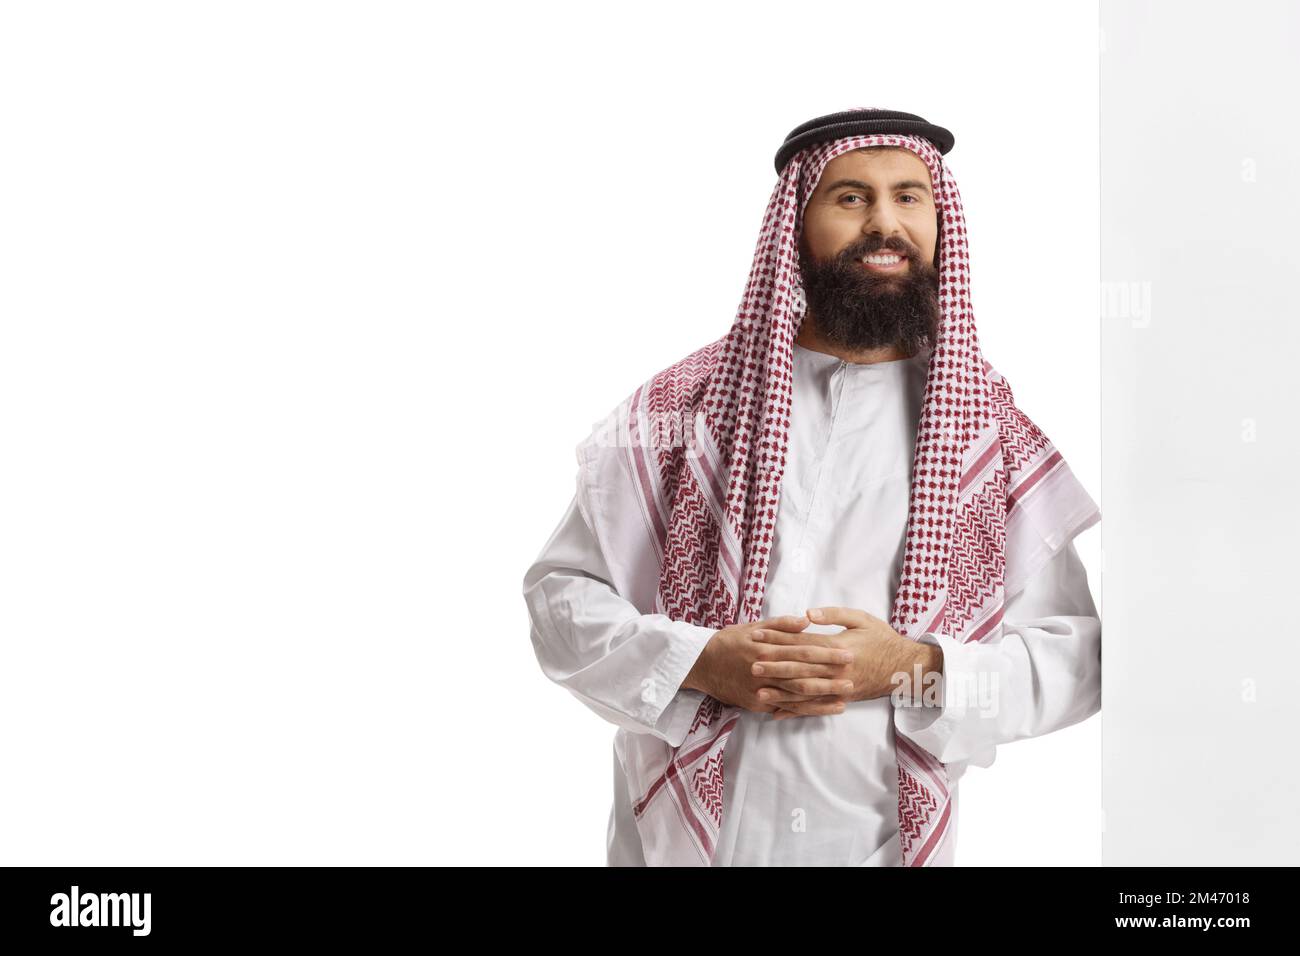 Saudi arab man wearing a traditional thobe and leaning on a wall isolated on white background Stock Photo